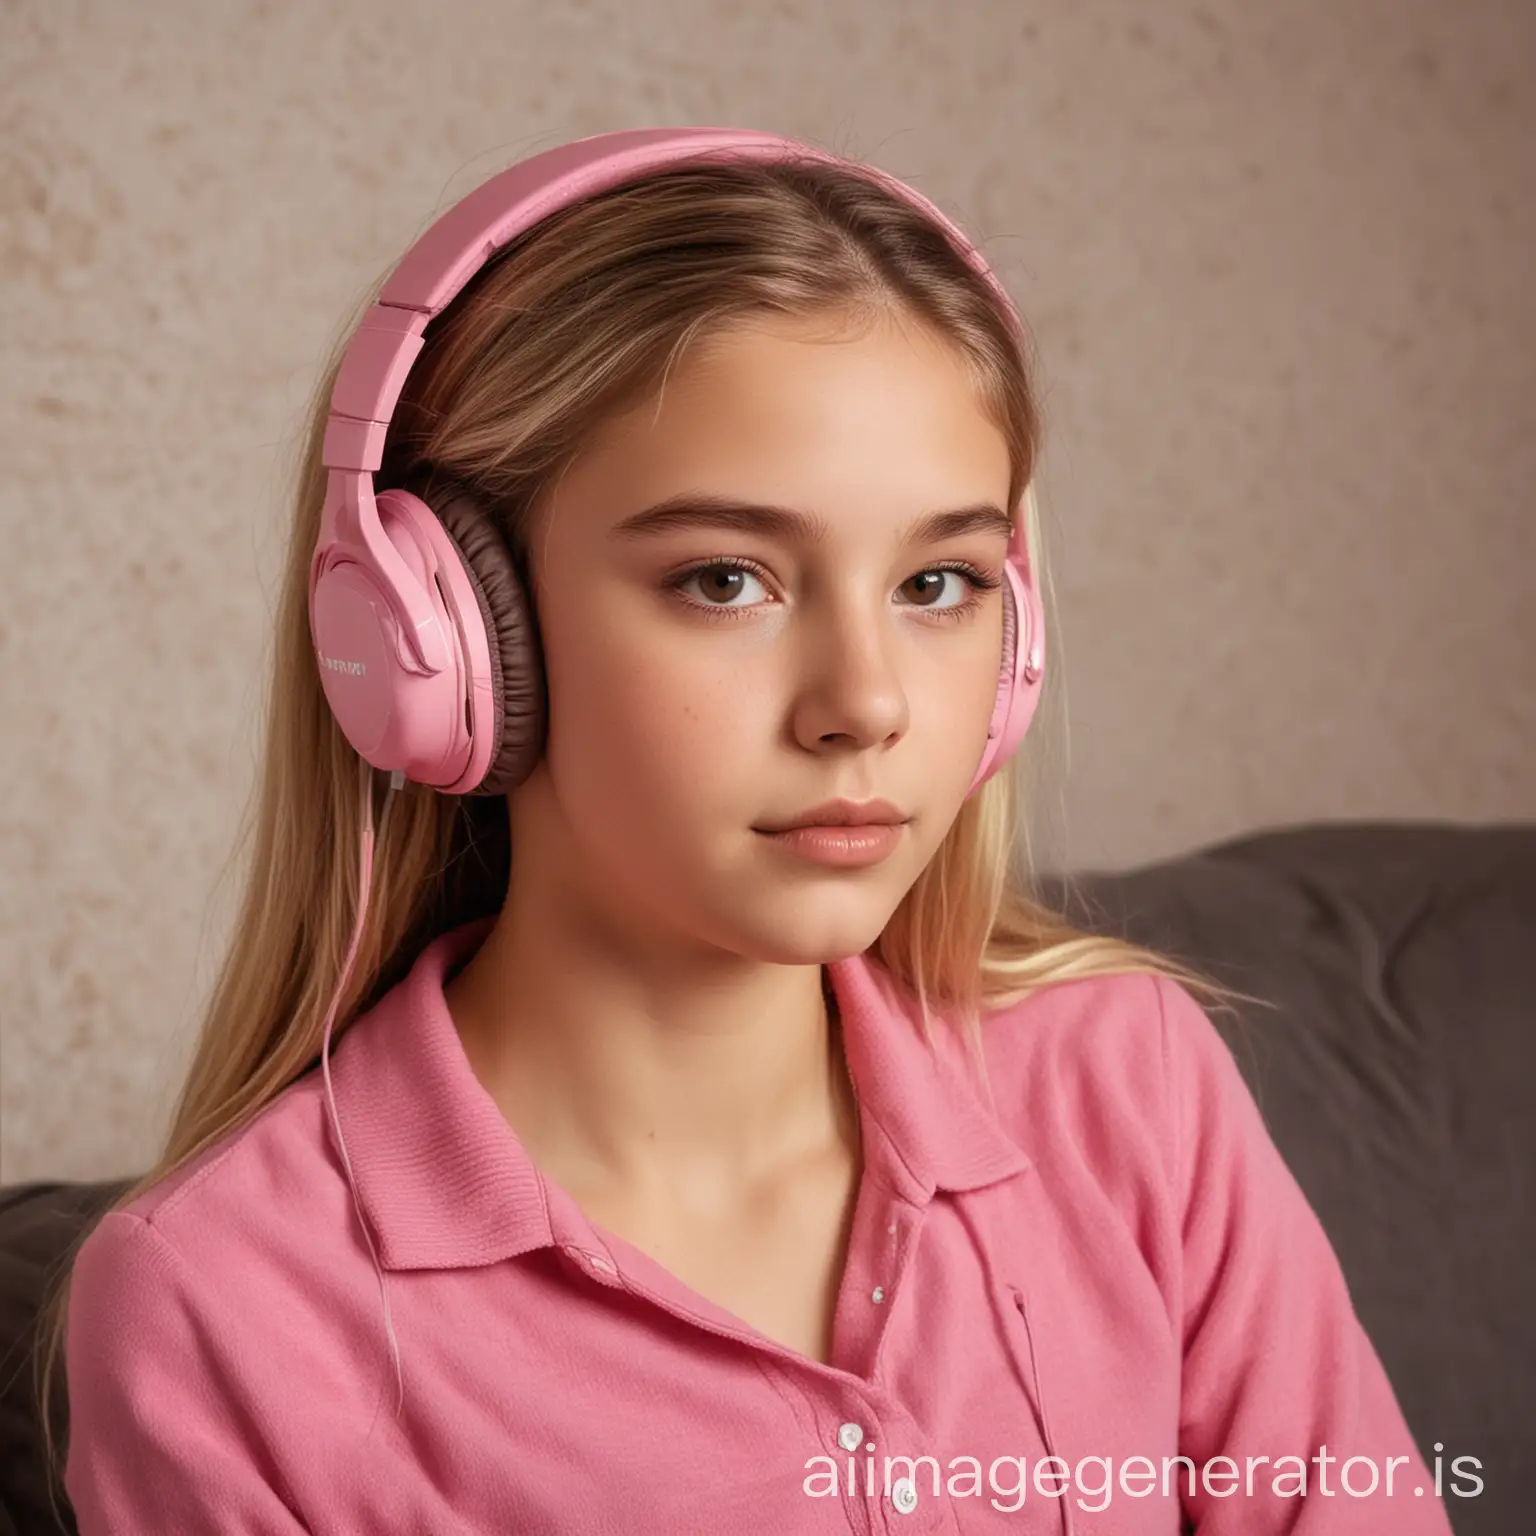 Teenage-Girl-Listening-to-Music-with-Pink-Headset